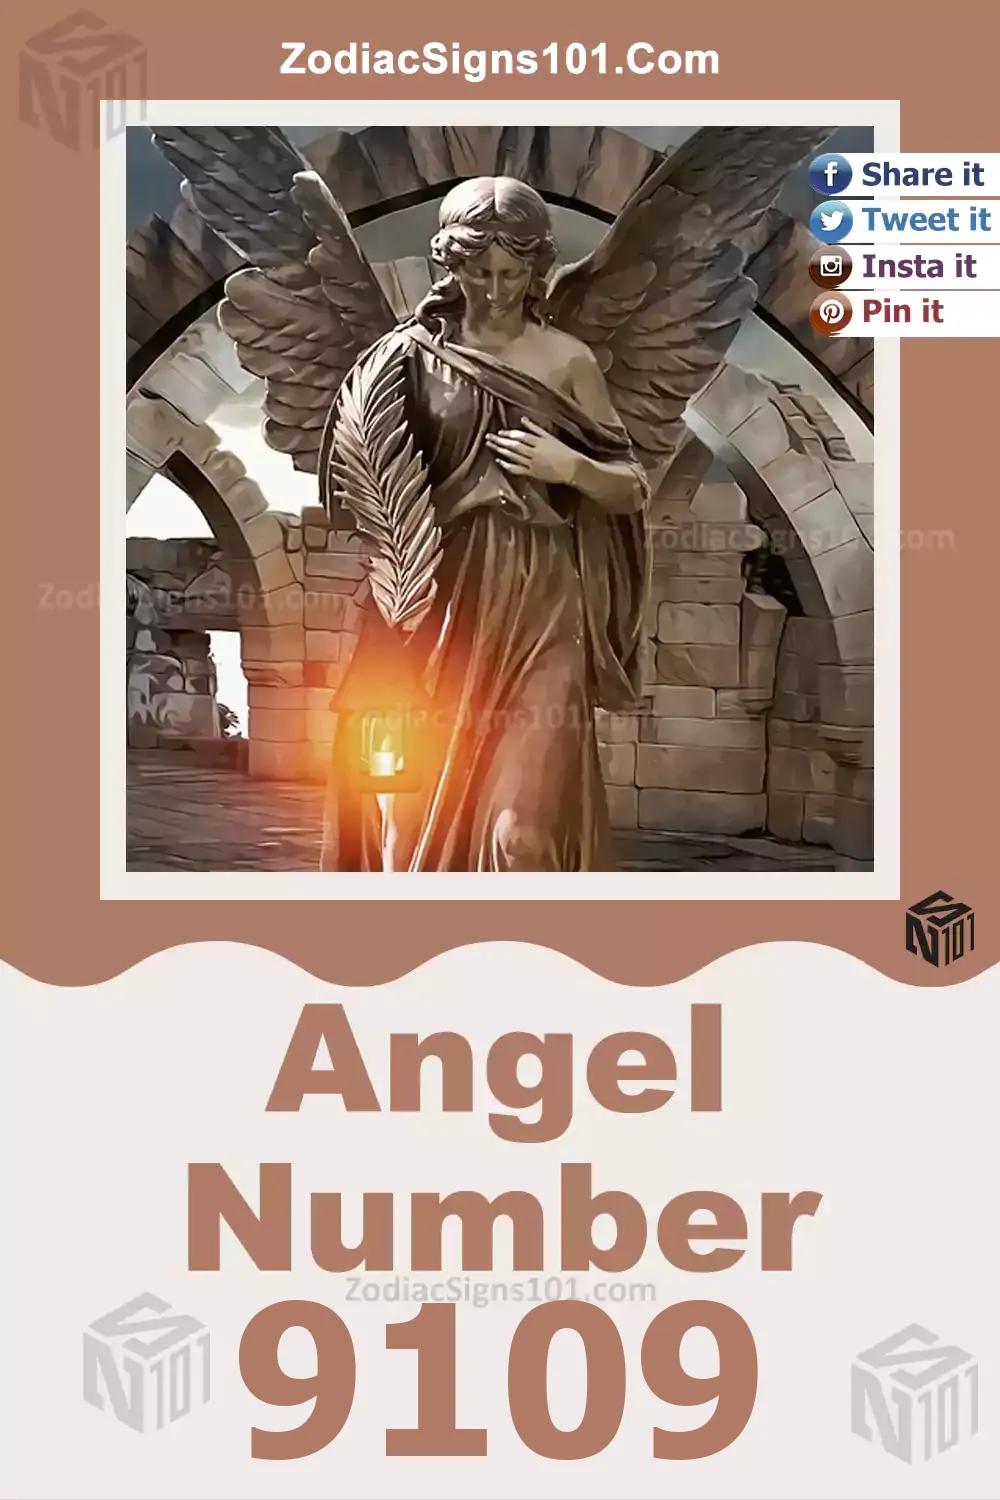 9109 Angel Number Meaning